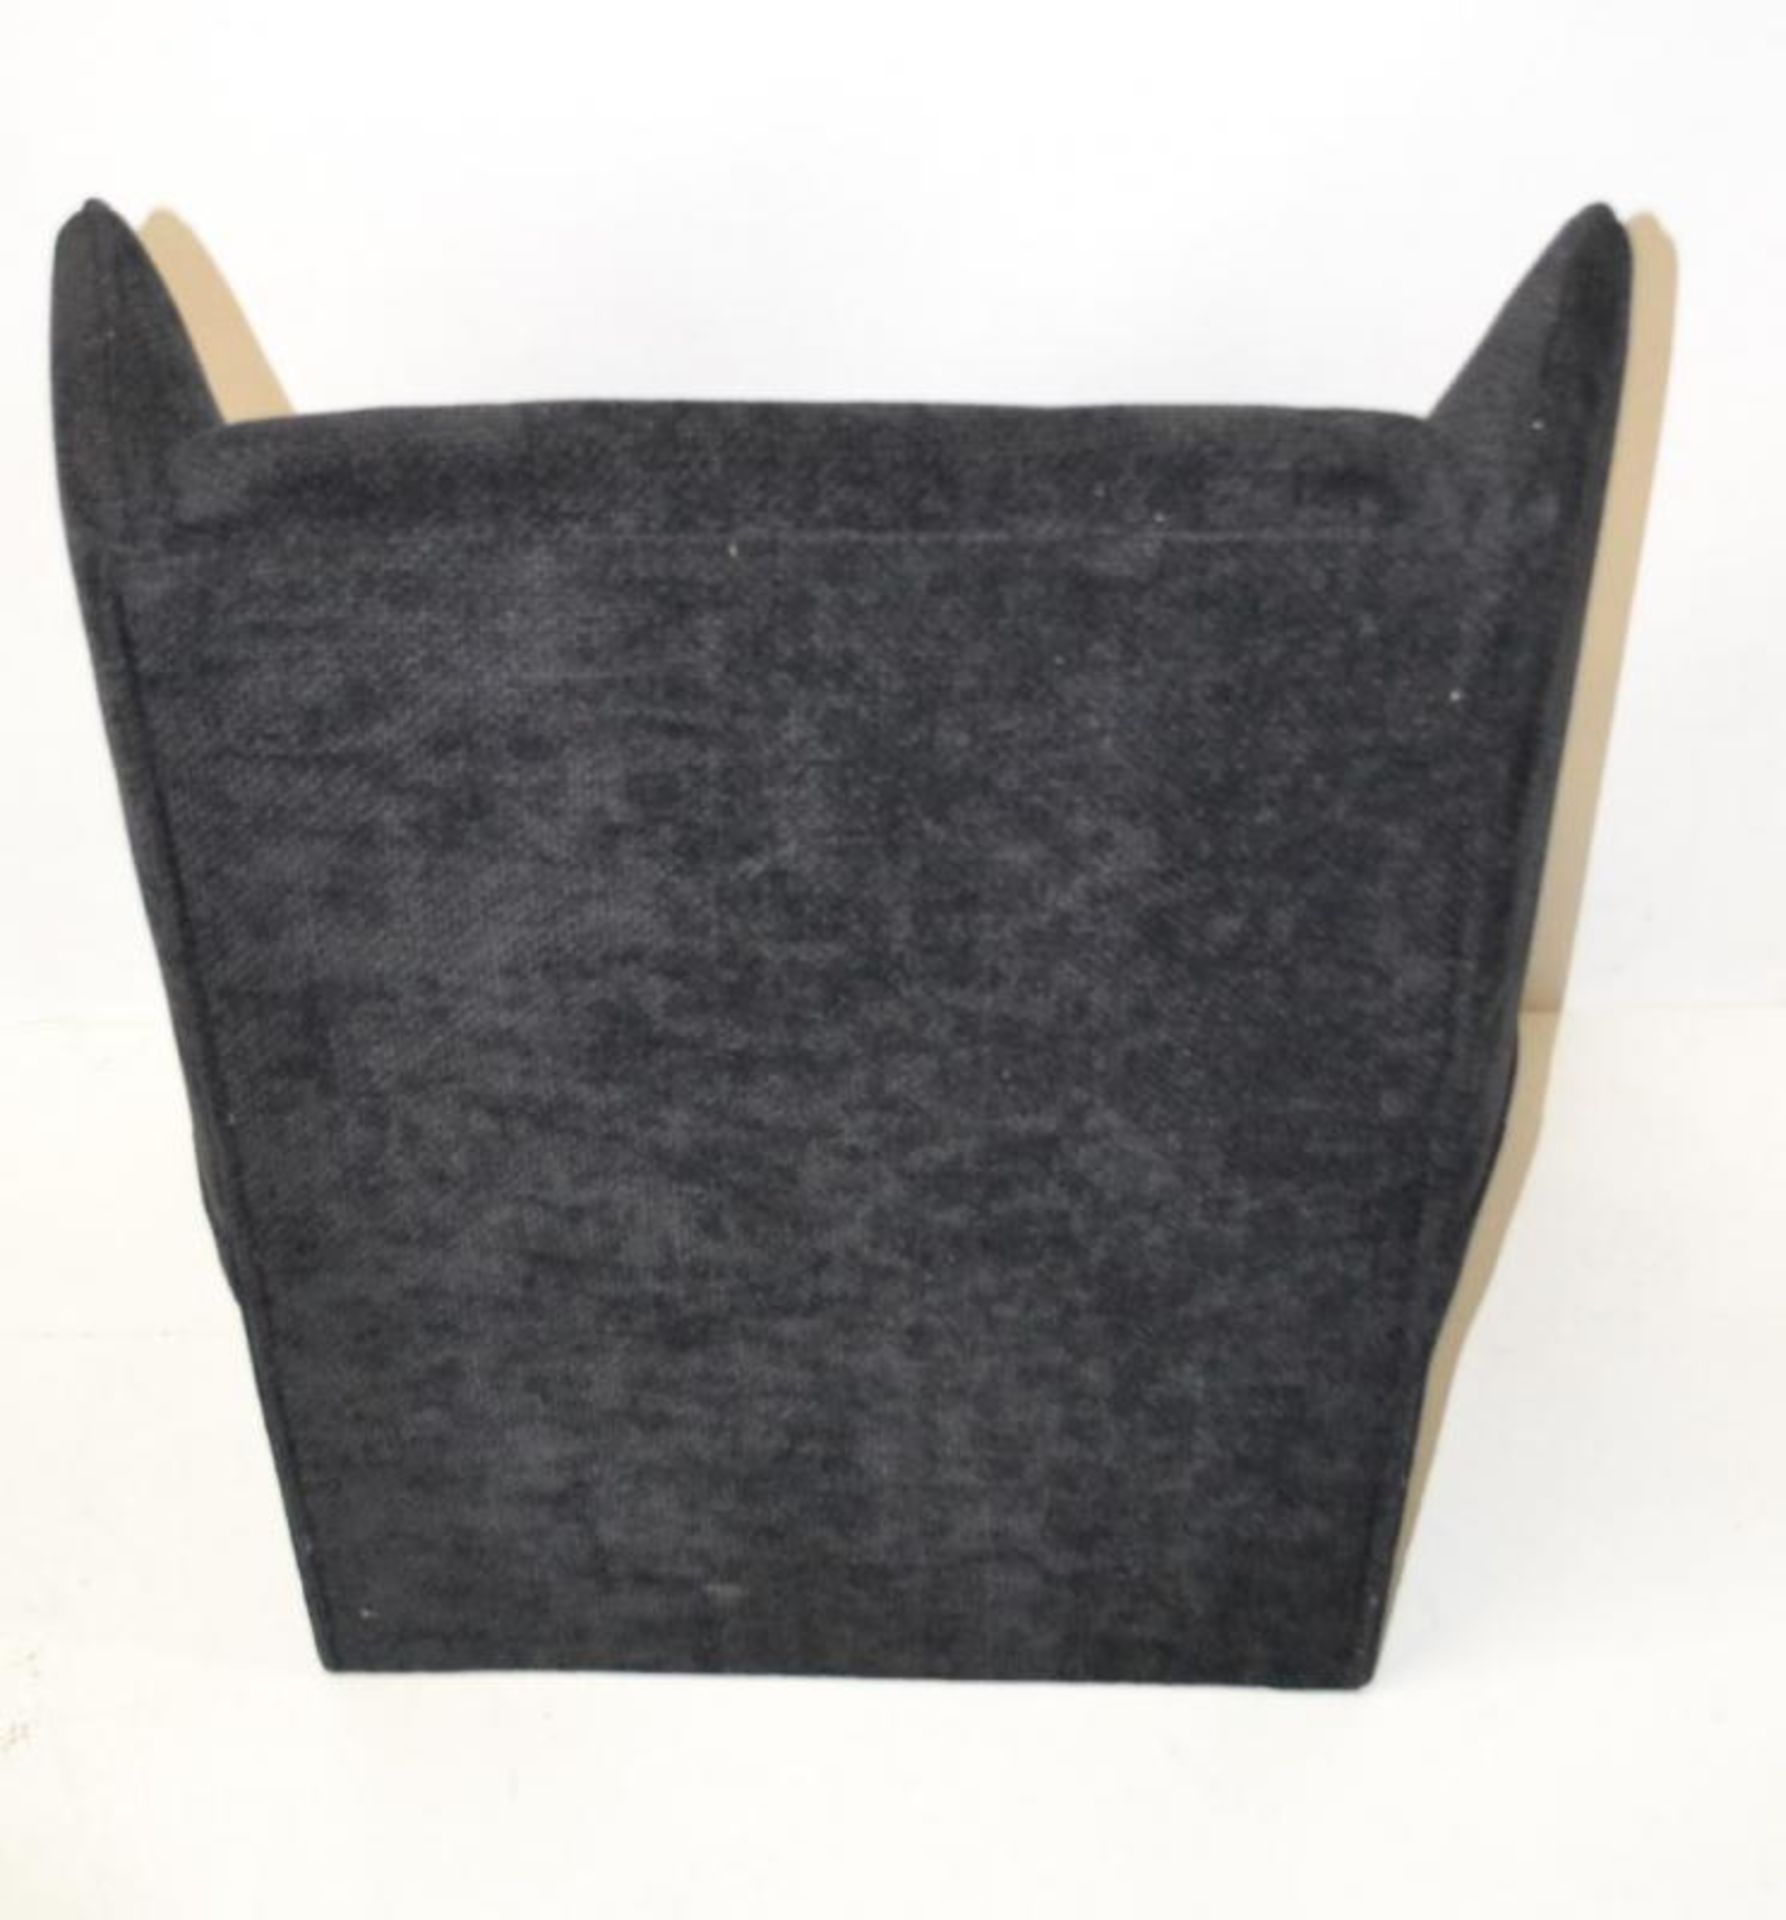 1 x Lounge Chair Finished In A Charcoal Fabric With 4 Walnut Legs - Ref: BLT373 - CL380 - NO VAT - - Image 6 of 9